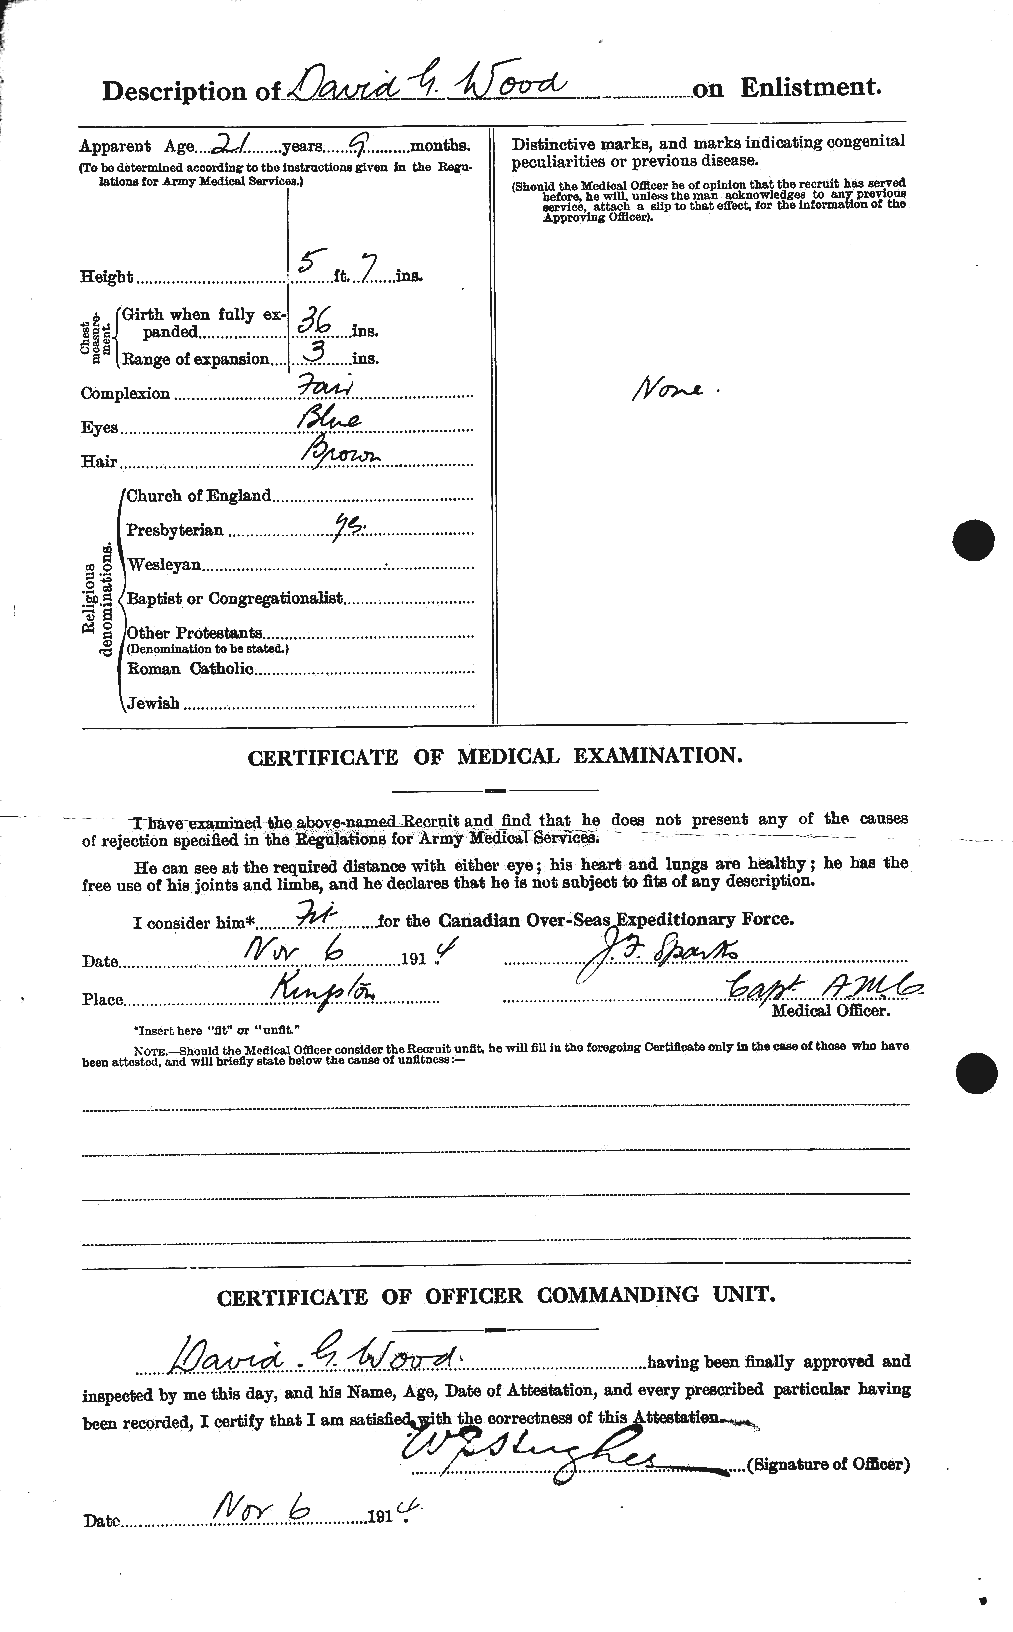 Personnel Records of the First World War - CEF 682957b